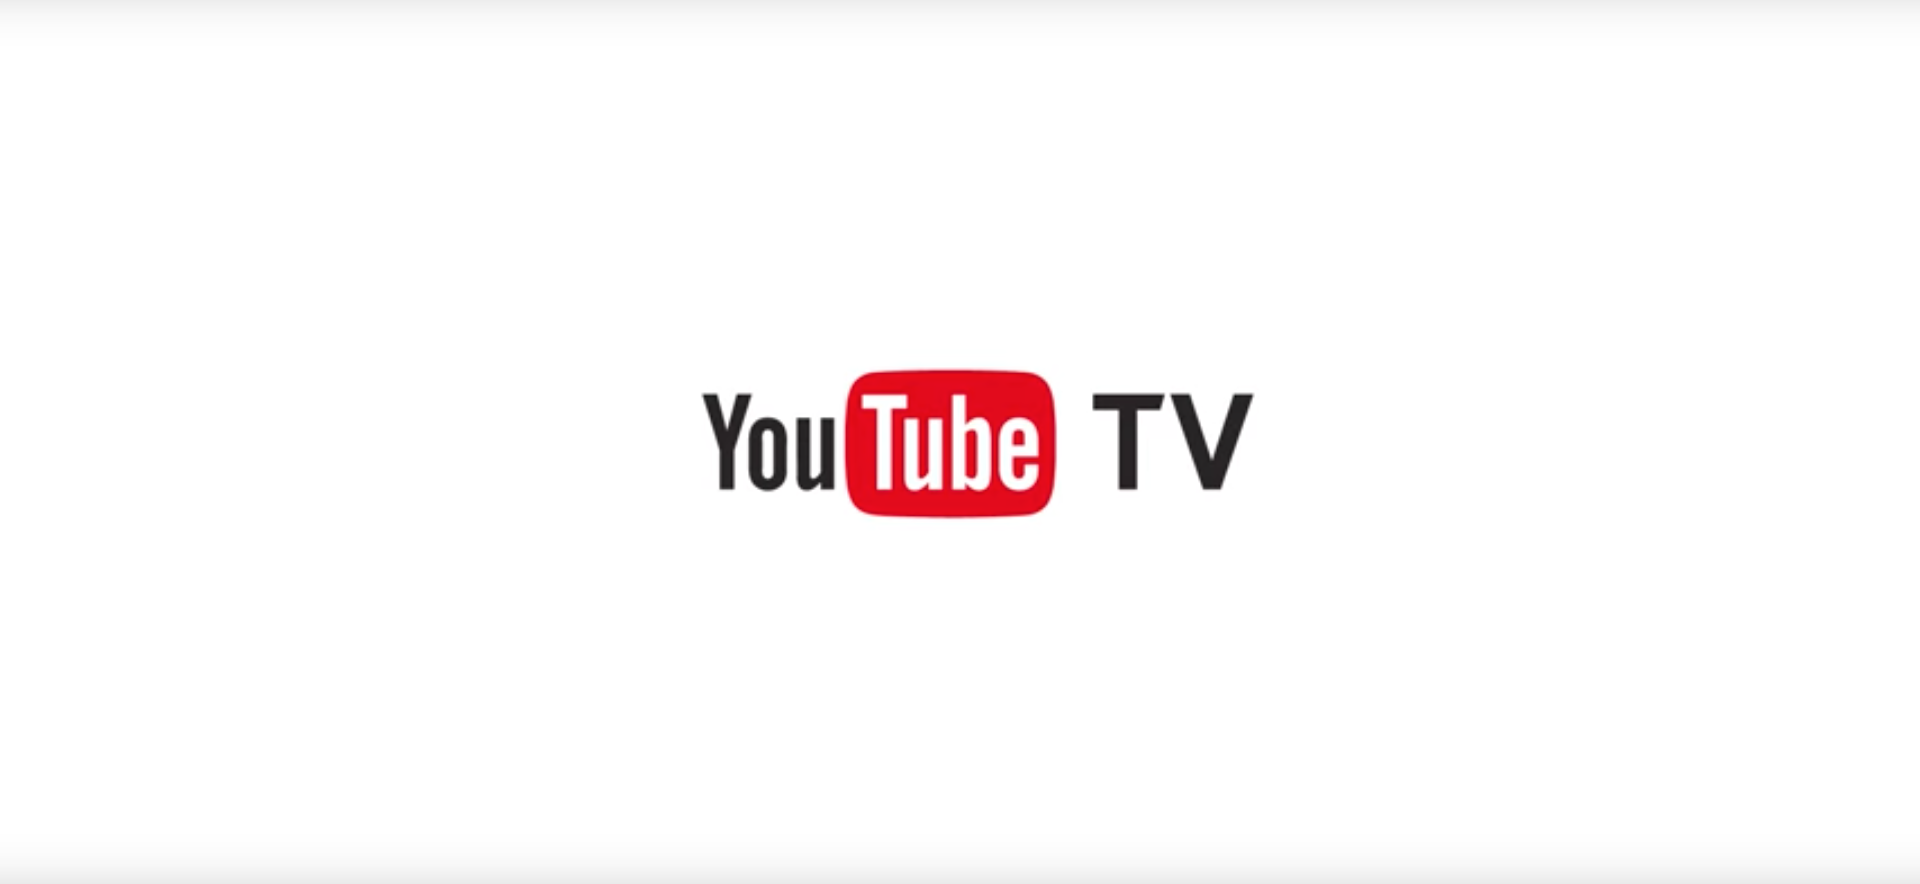 YouTube TV expands to Houston, Atlanta, Phoenix and additional cities